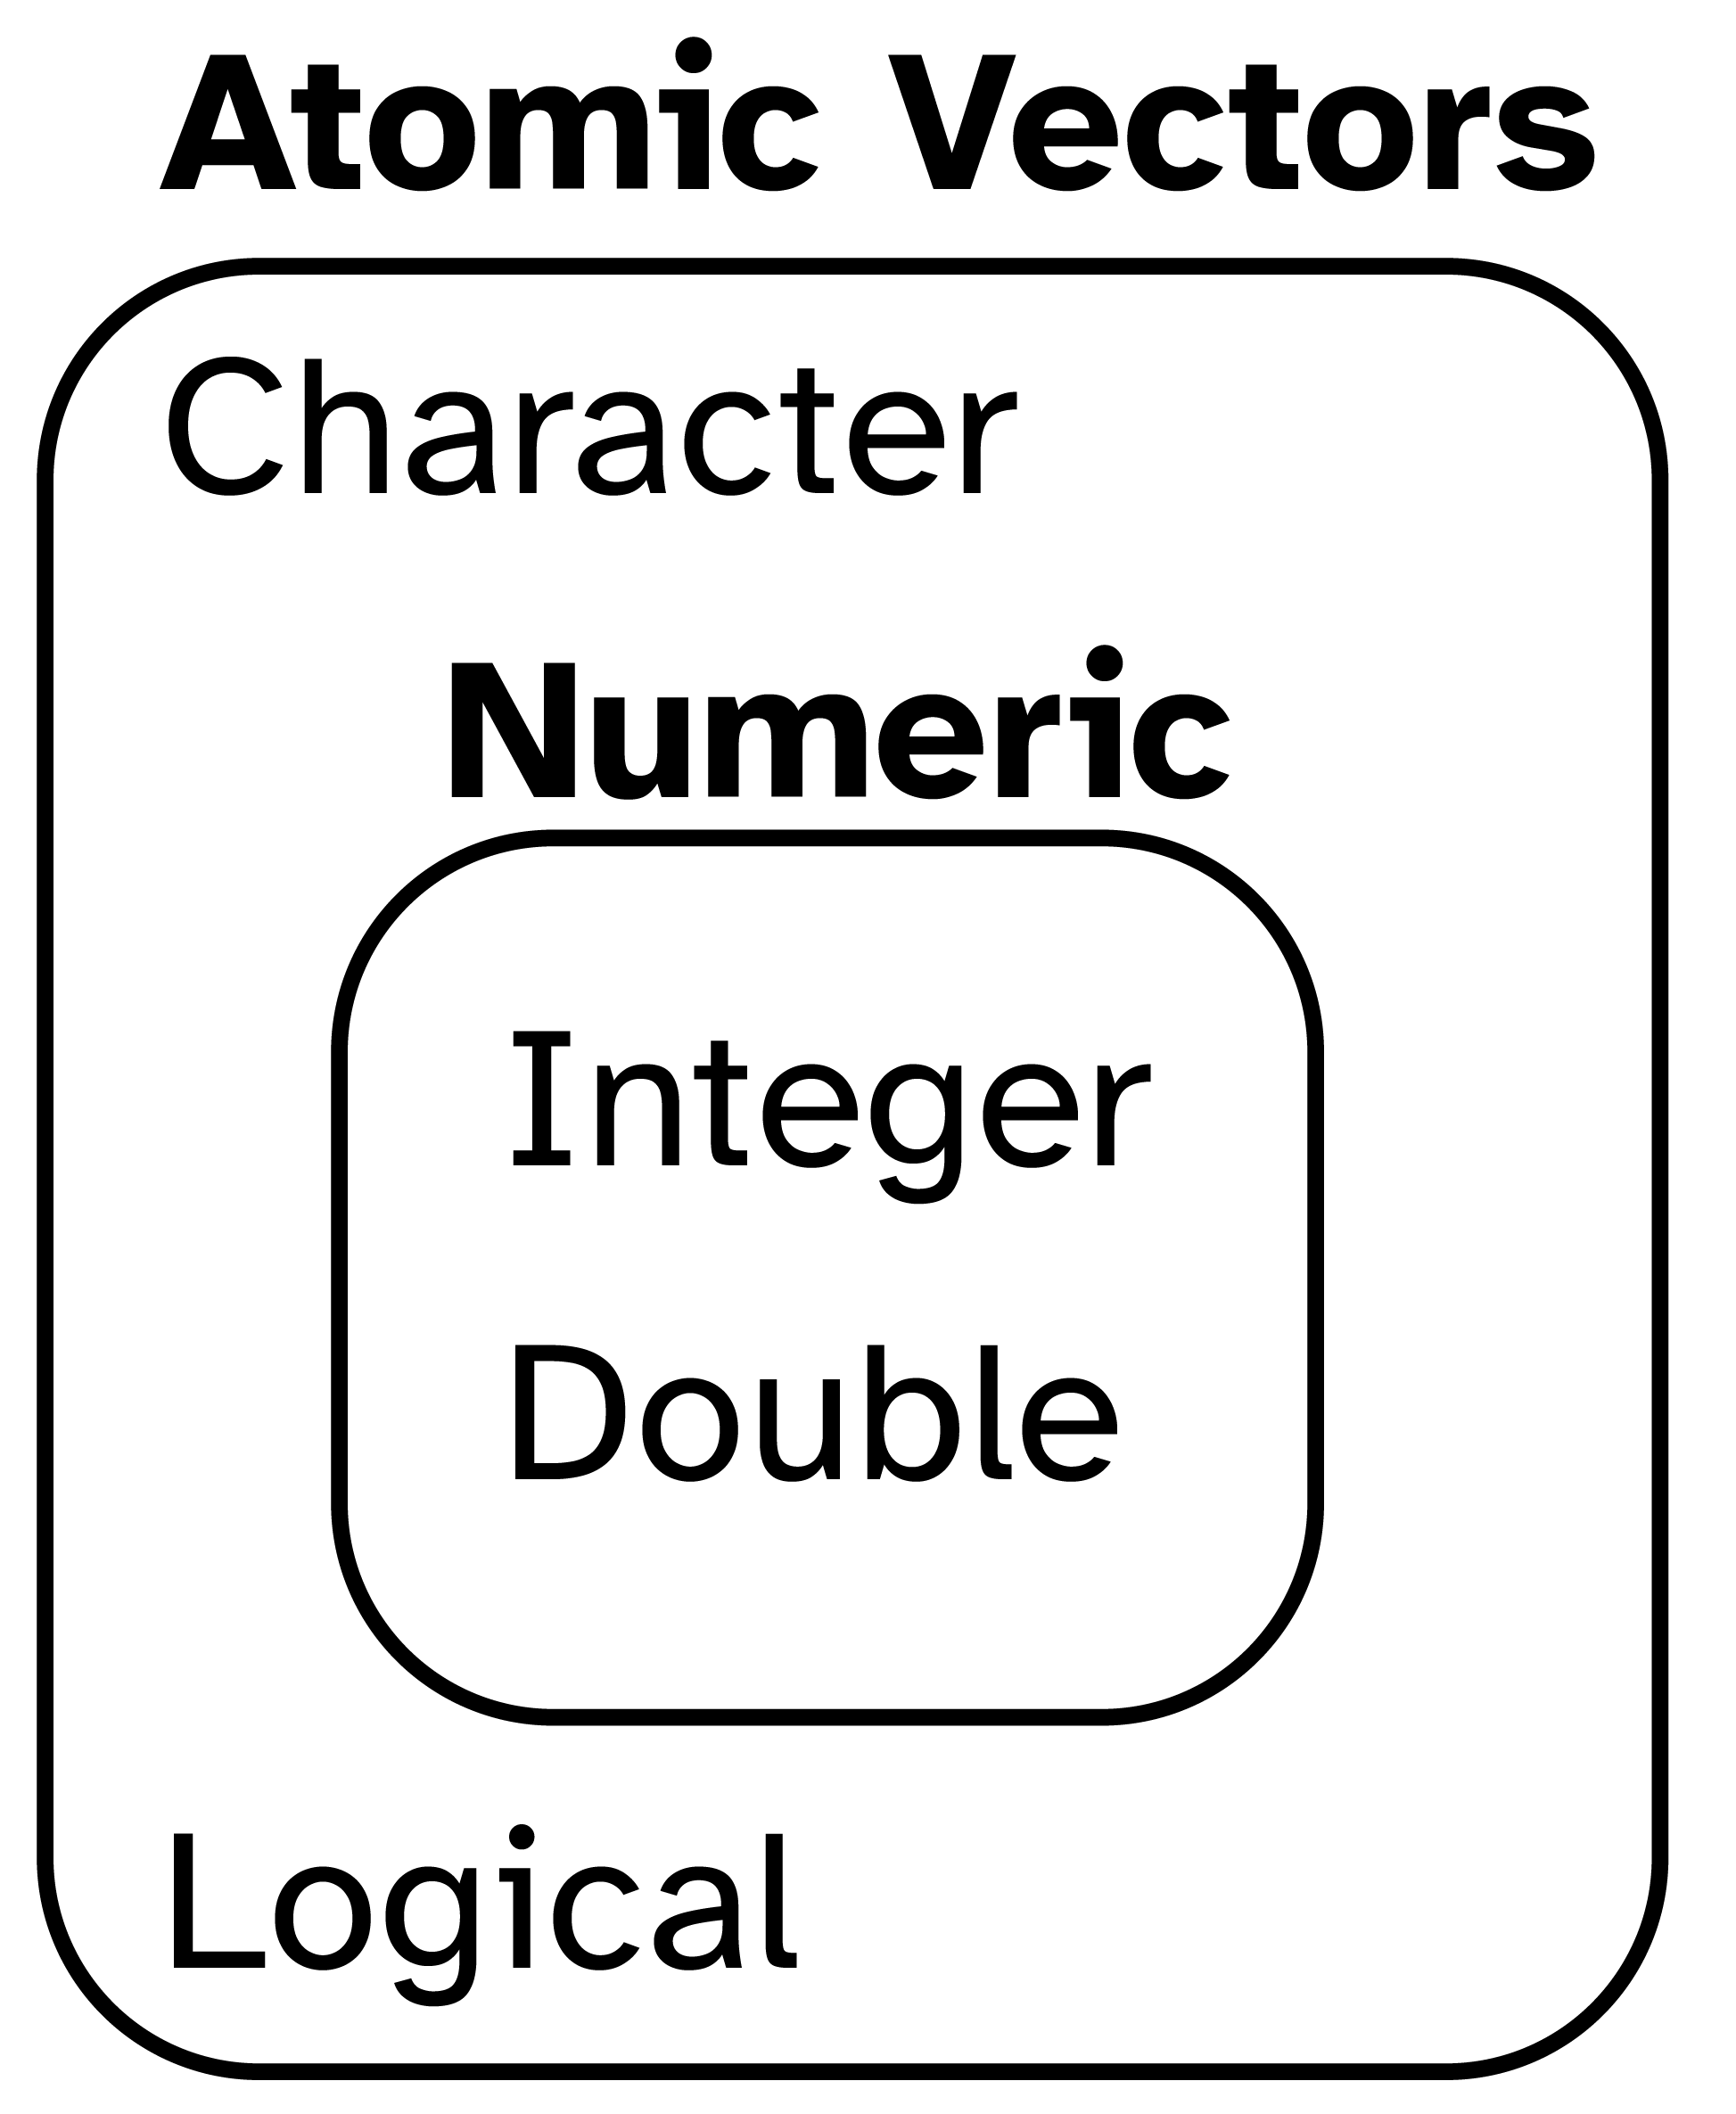 An image of atomic R data types: doubles, integers, characters and logicals.